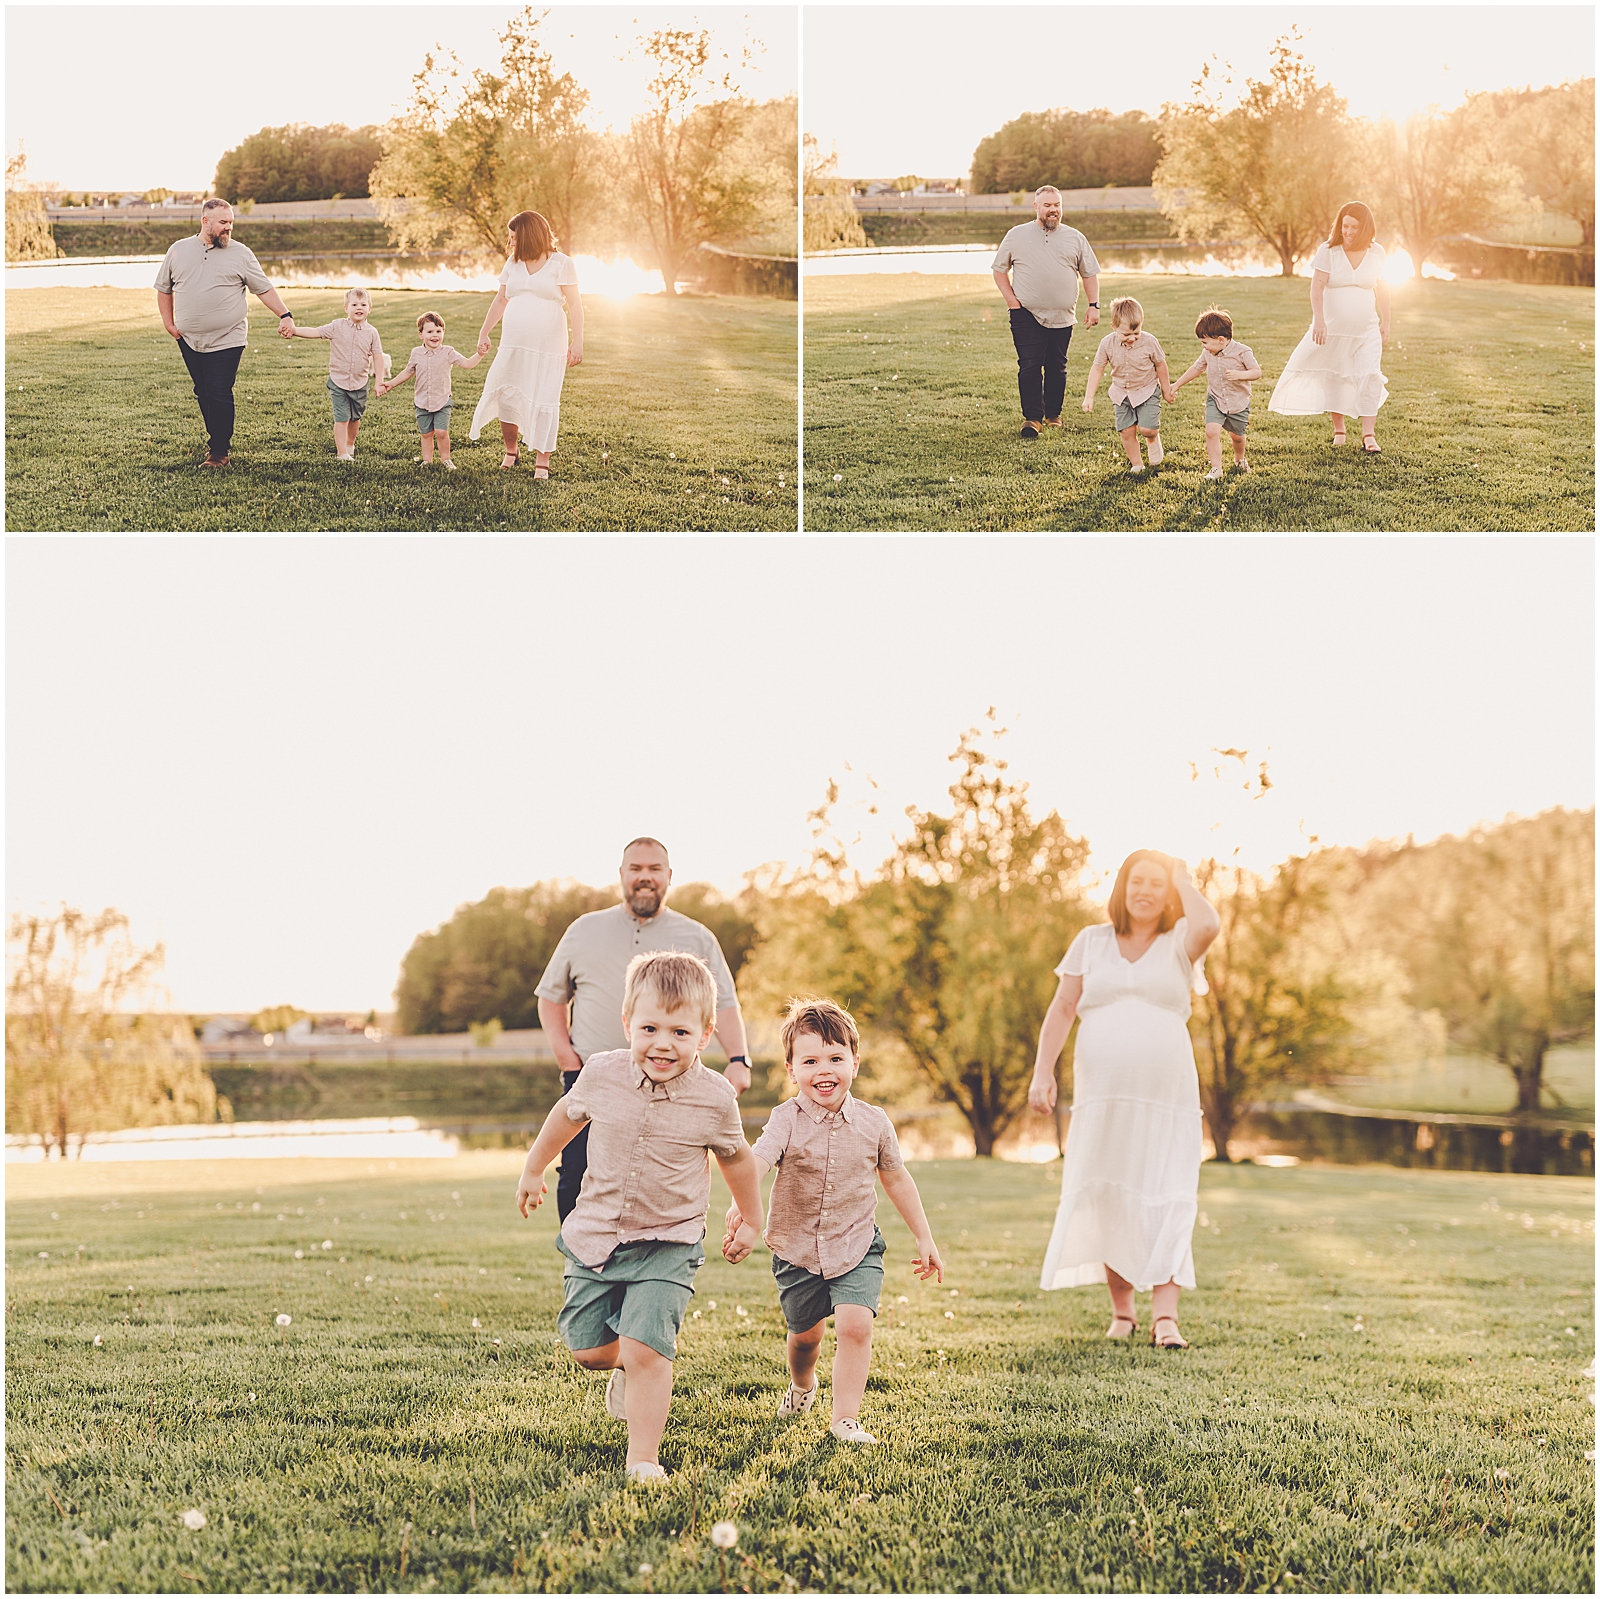 Spring family session in Central Illinois Mackinaw with Chicagoland family photographer Kara Evans Photographer.